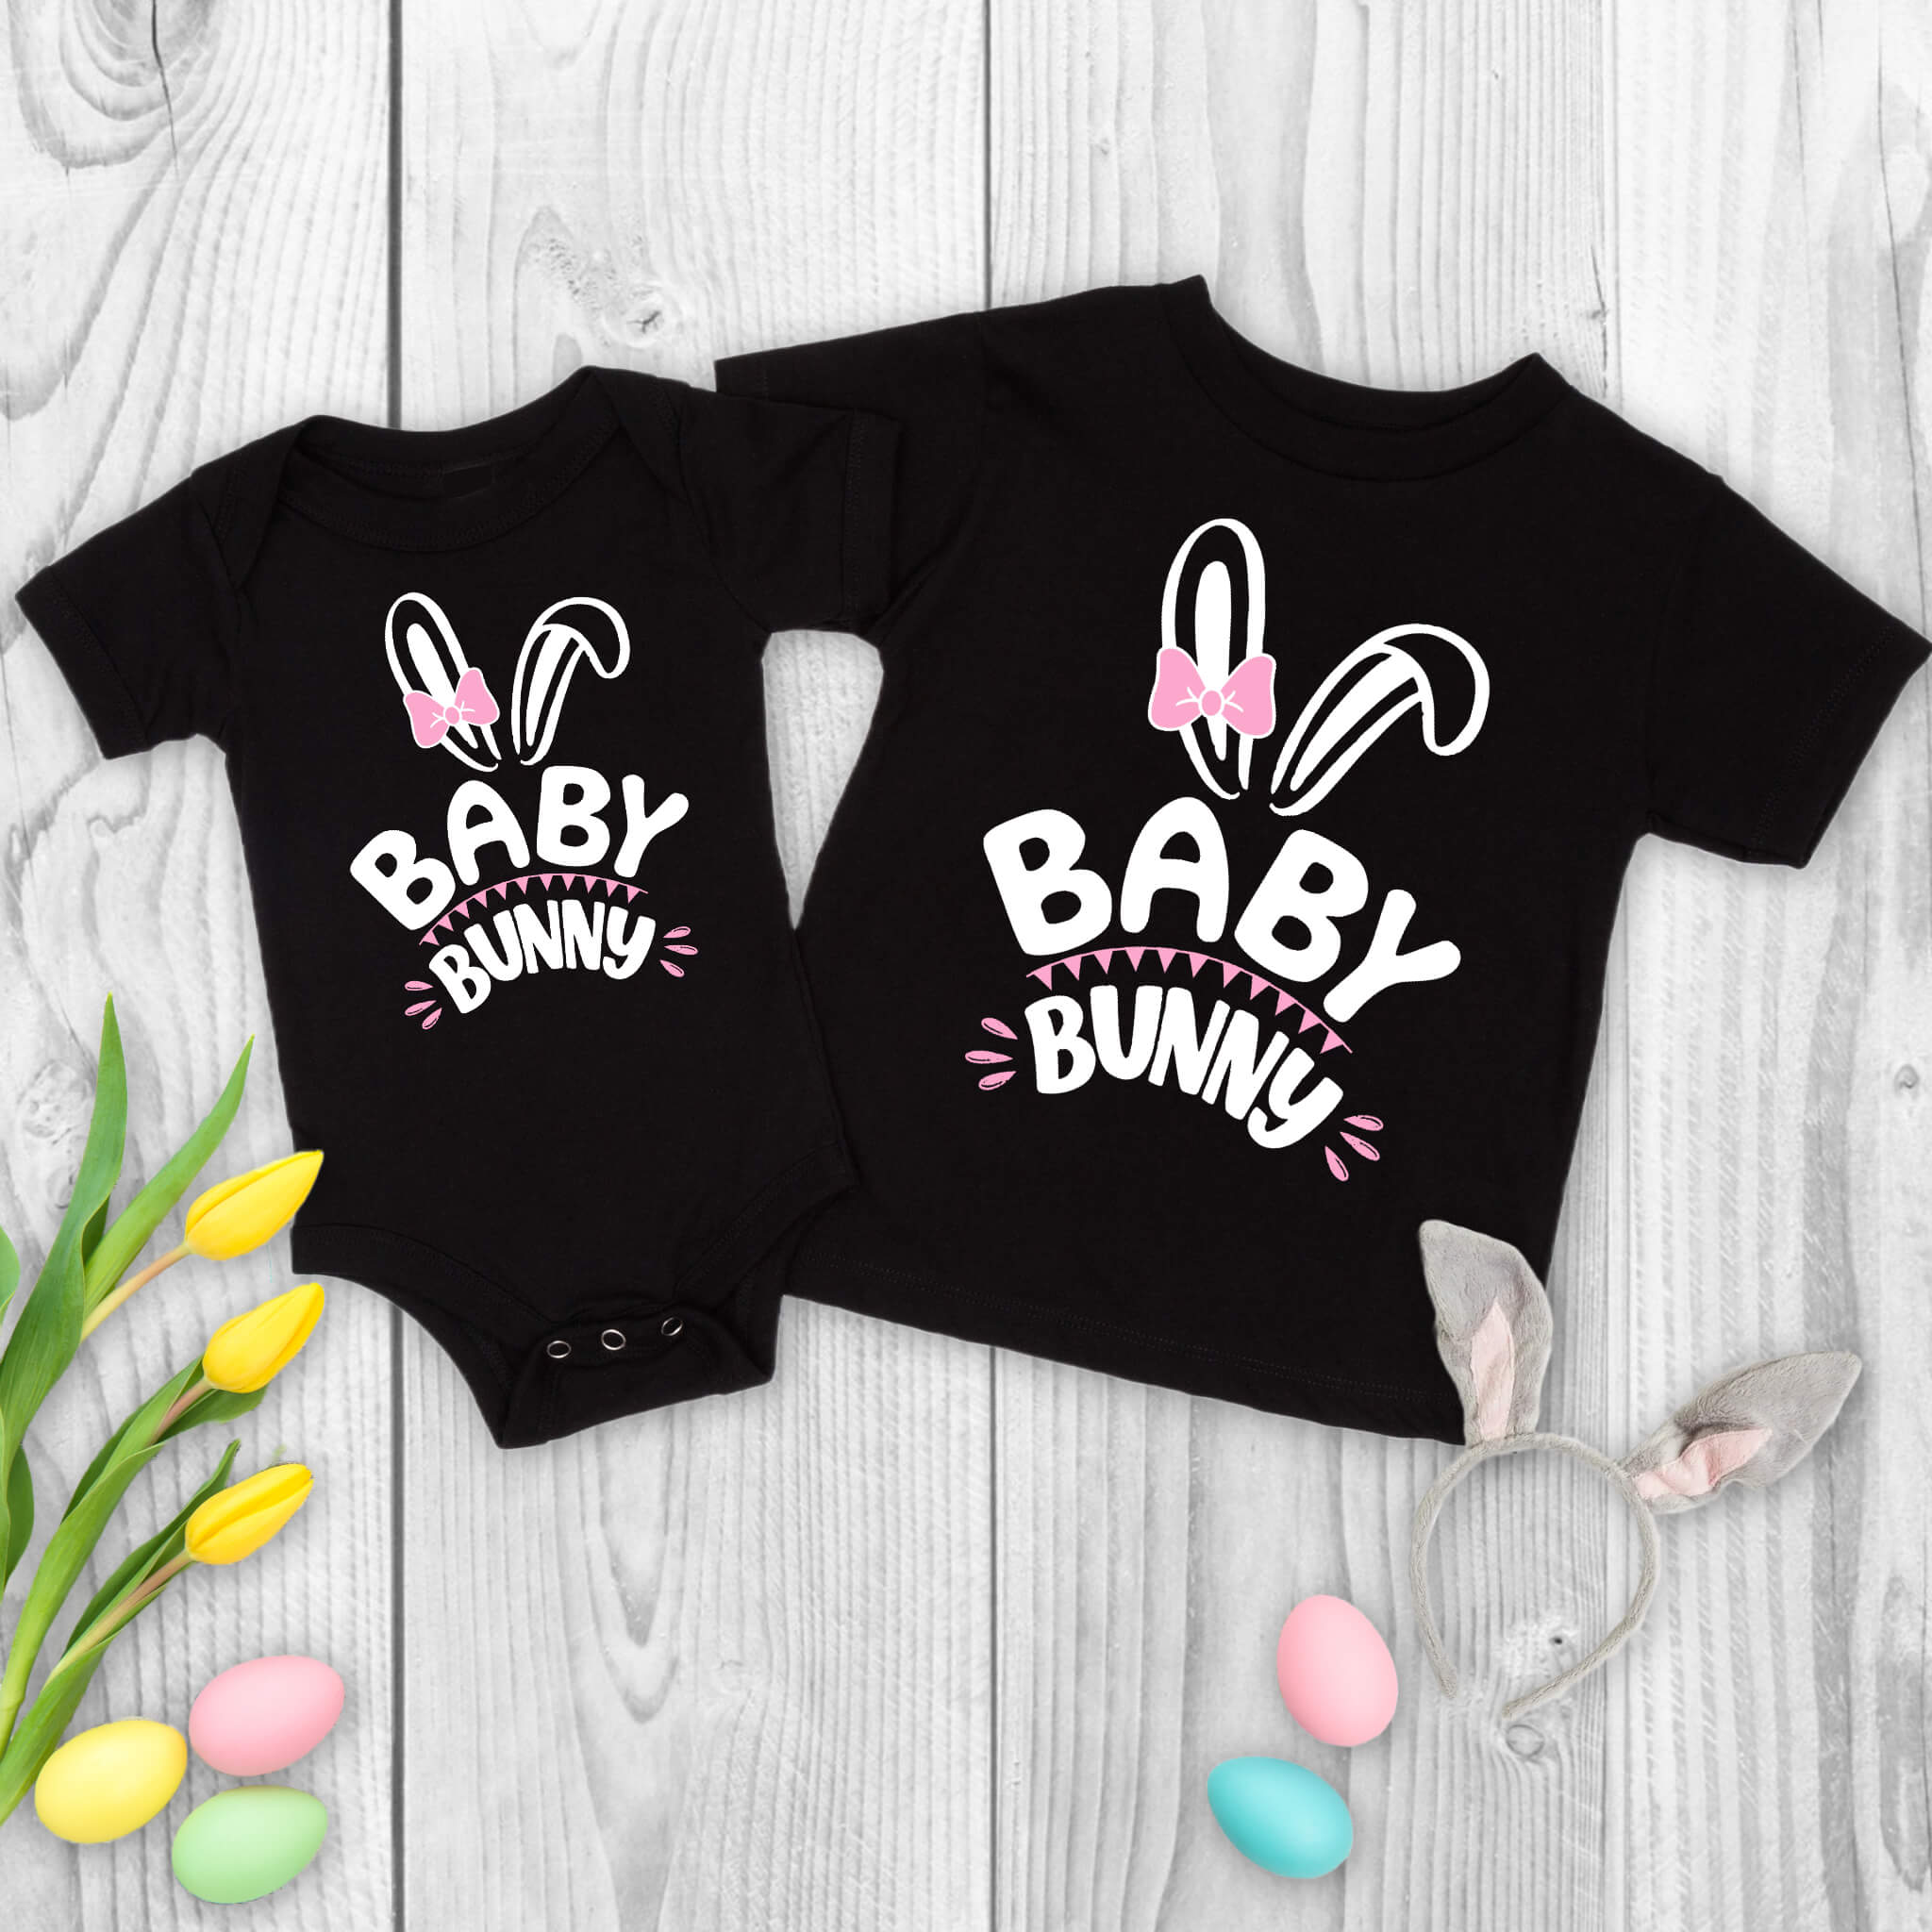 Easter, Matching Sibling, Sister Bunny or Baby Bunny, Girl's, Twin's